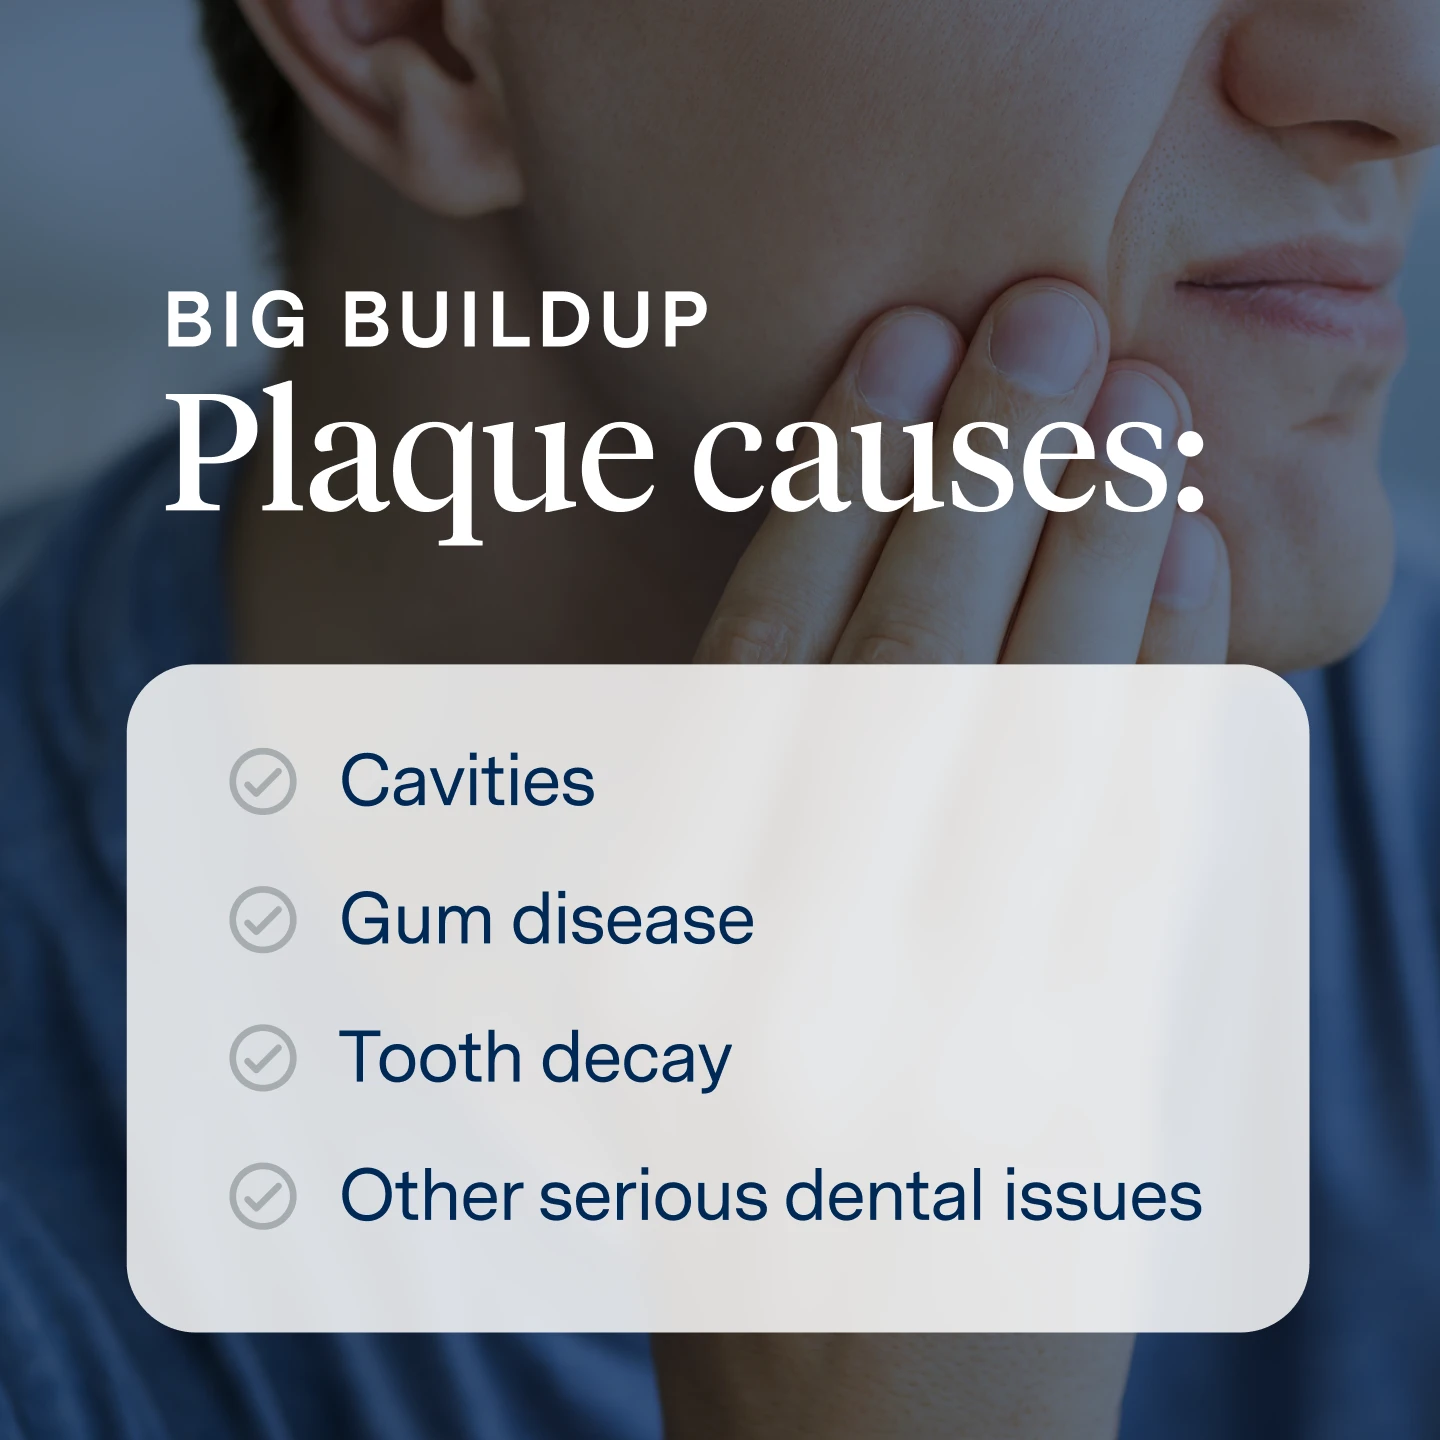 Big buildup of plaque causes cavities, gum disease, tooth decay, bad breath and other serious dental issues if untreated.